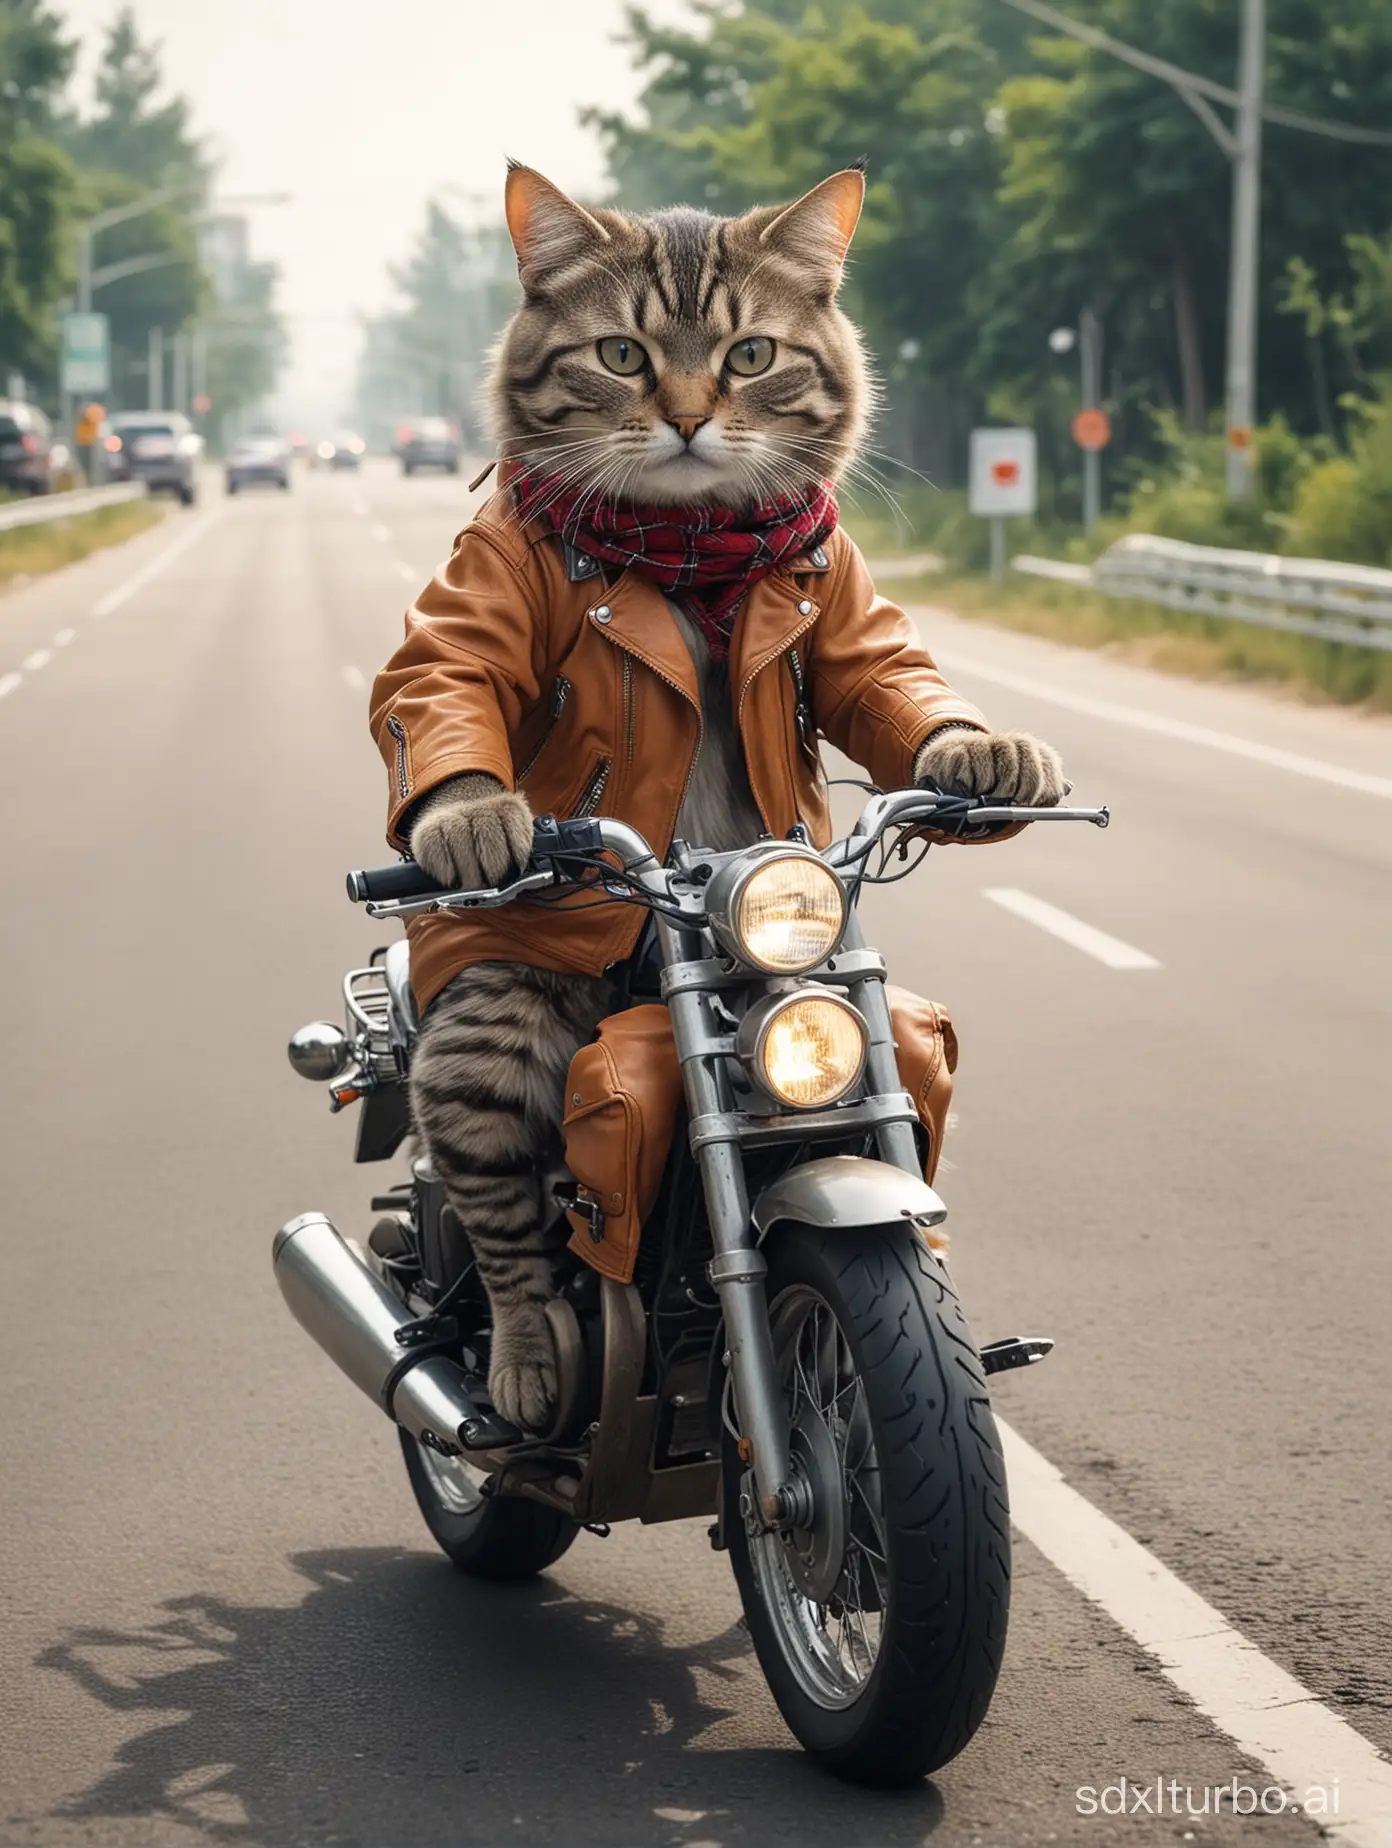 A cat anthropomorphized riding a motorcycle is speeding on the road.